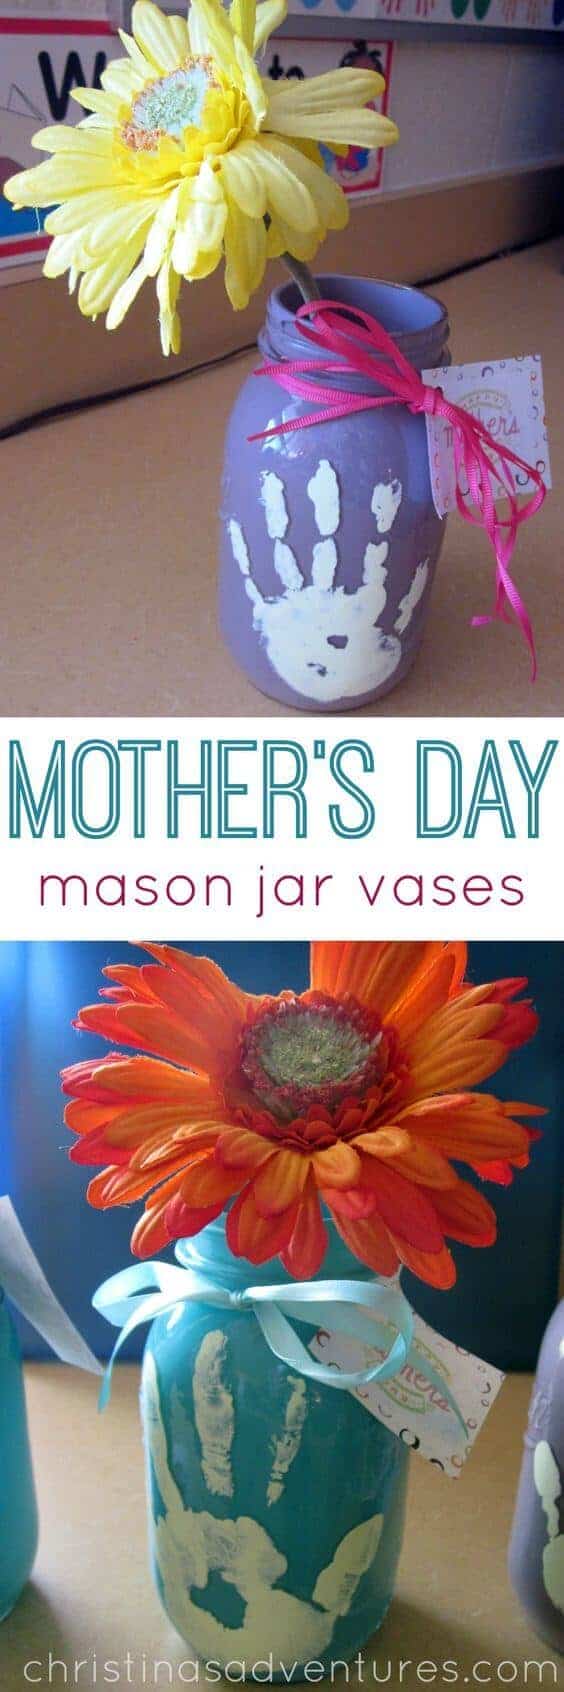 Mother's Day Mason Jar Vases by Christina's Adventures 